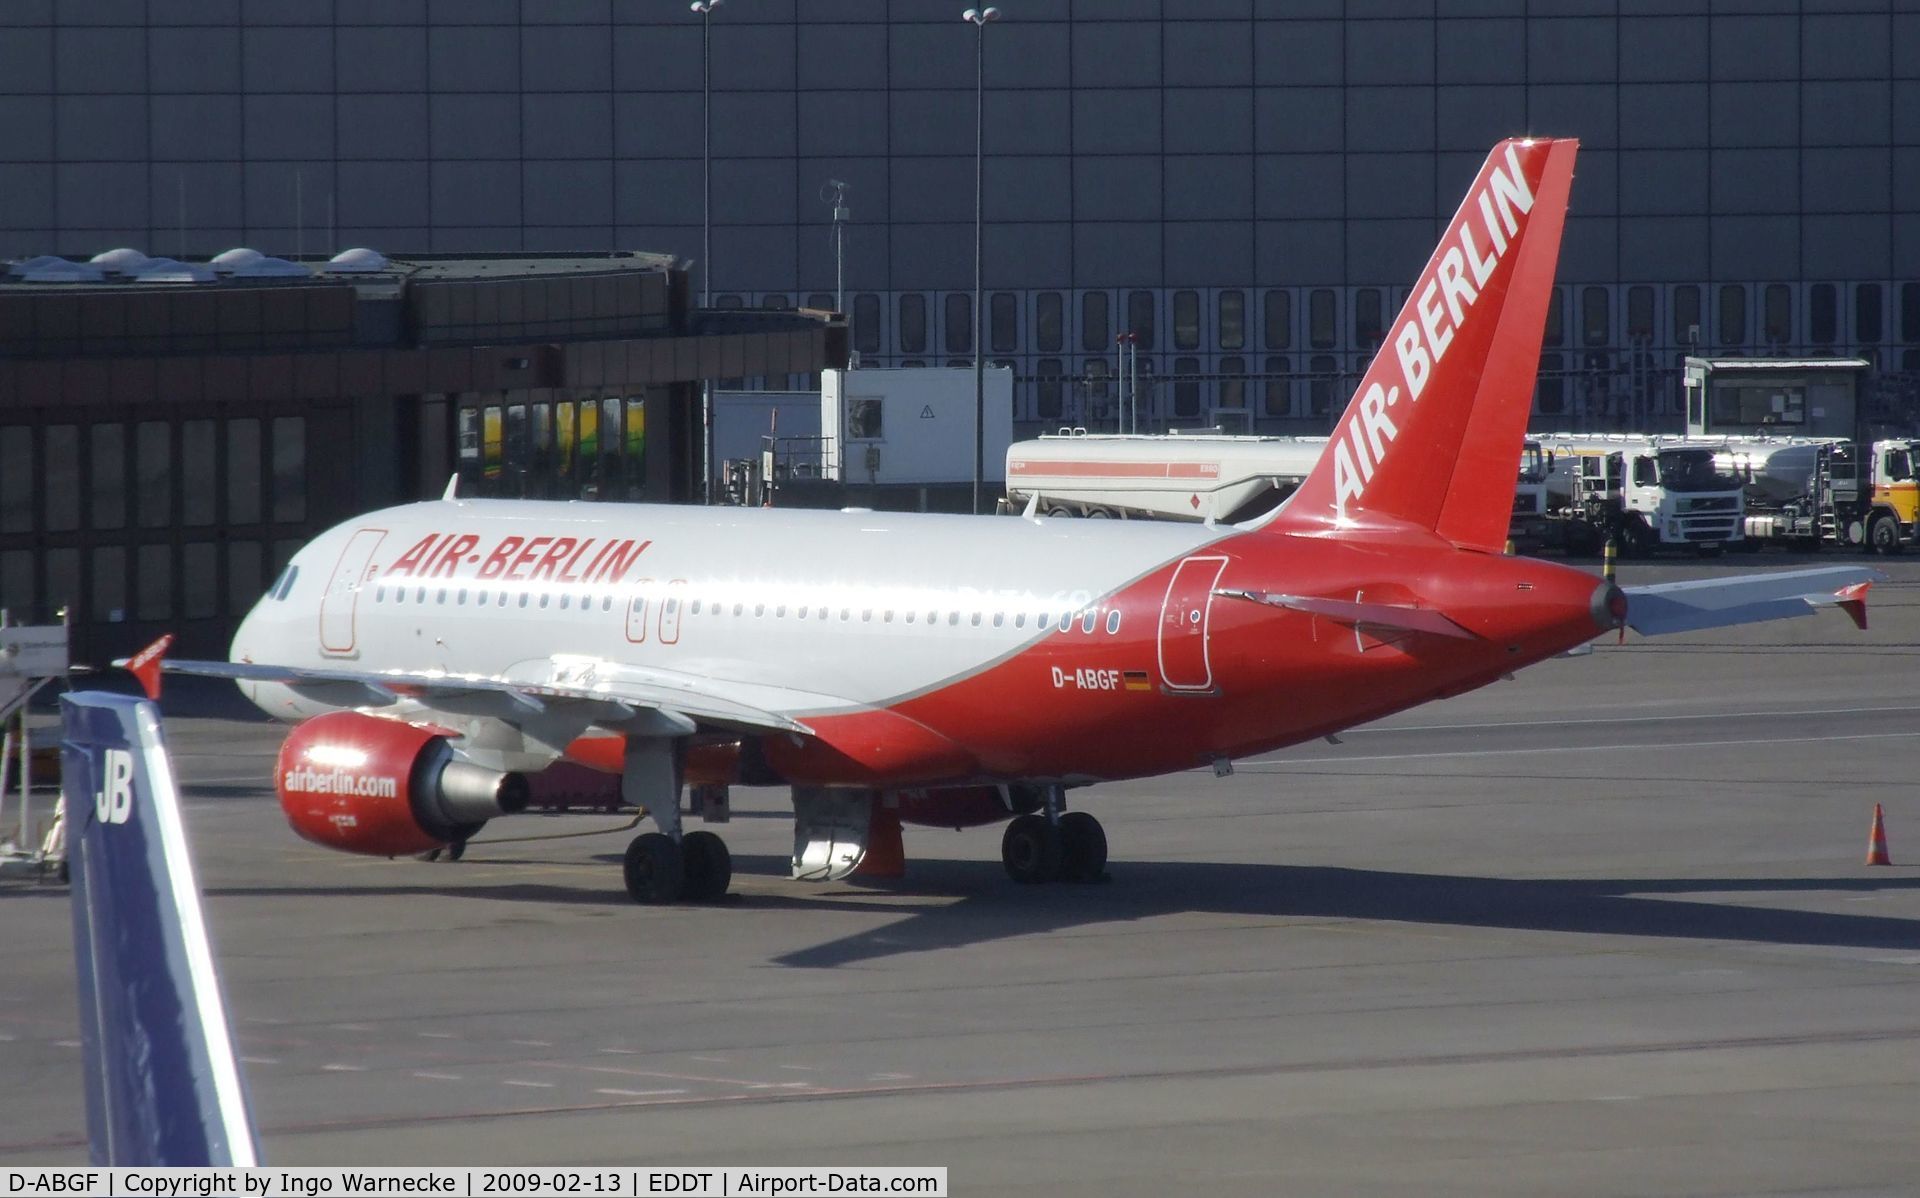 D-ABGF, 2007 Airbus A319-111 C/N 3188, Airbus A319-100 of AirBerlin at Berlin Tegel airport